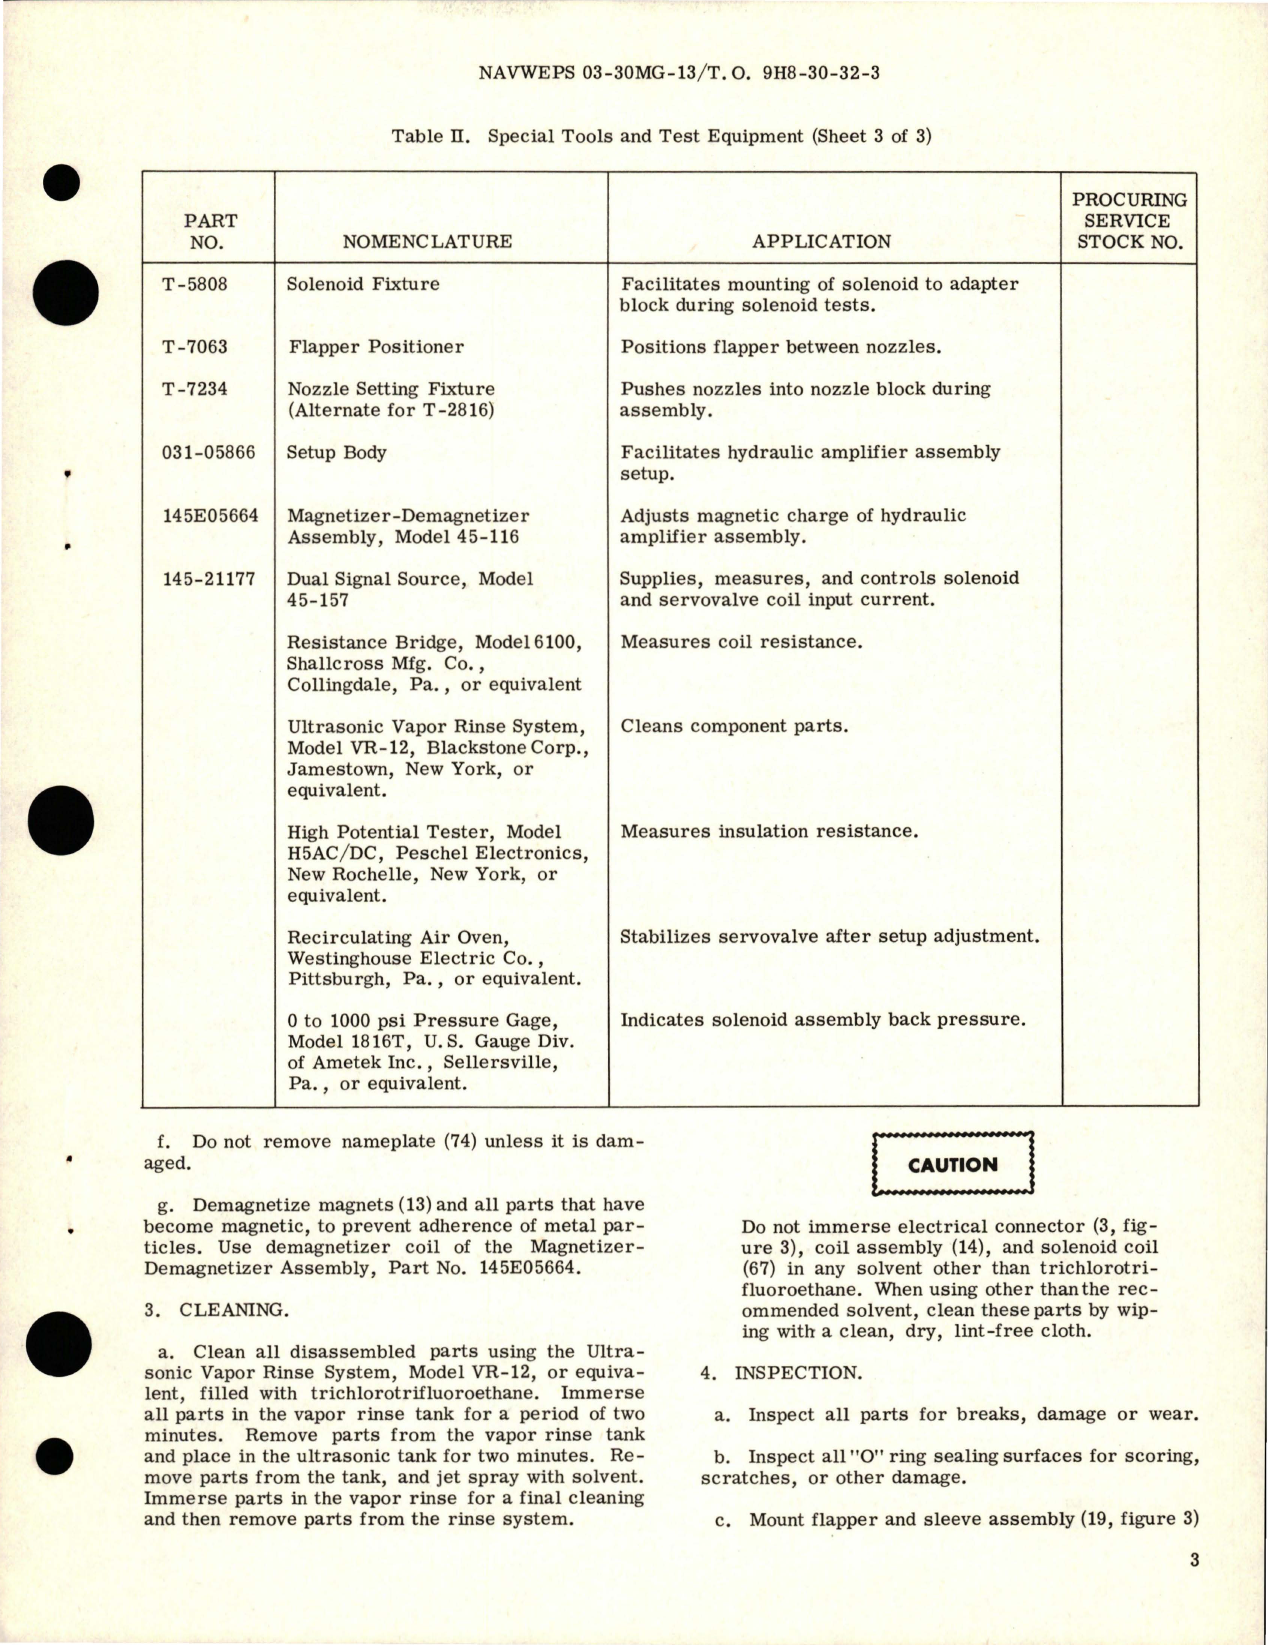 Sample page 5 from AirCorps Library document: Overhaul with Parts Breakdown for Servovalve - Part 010-24000 - Model 50-122A